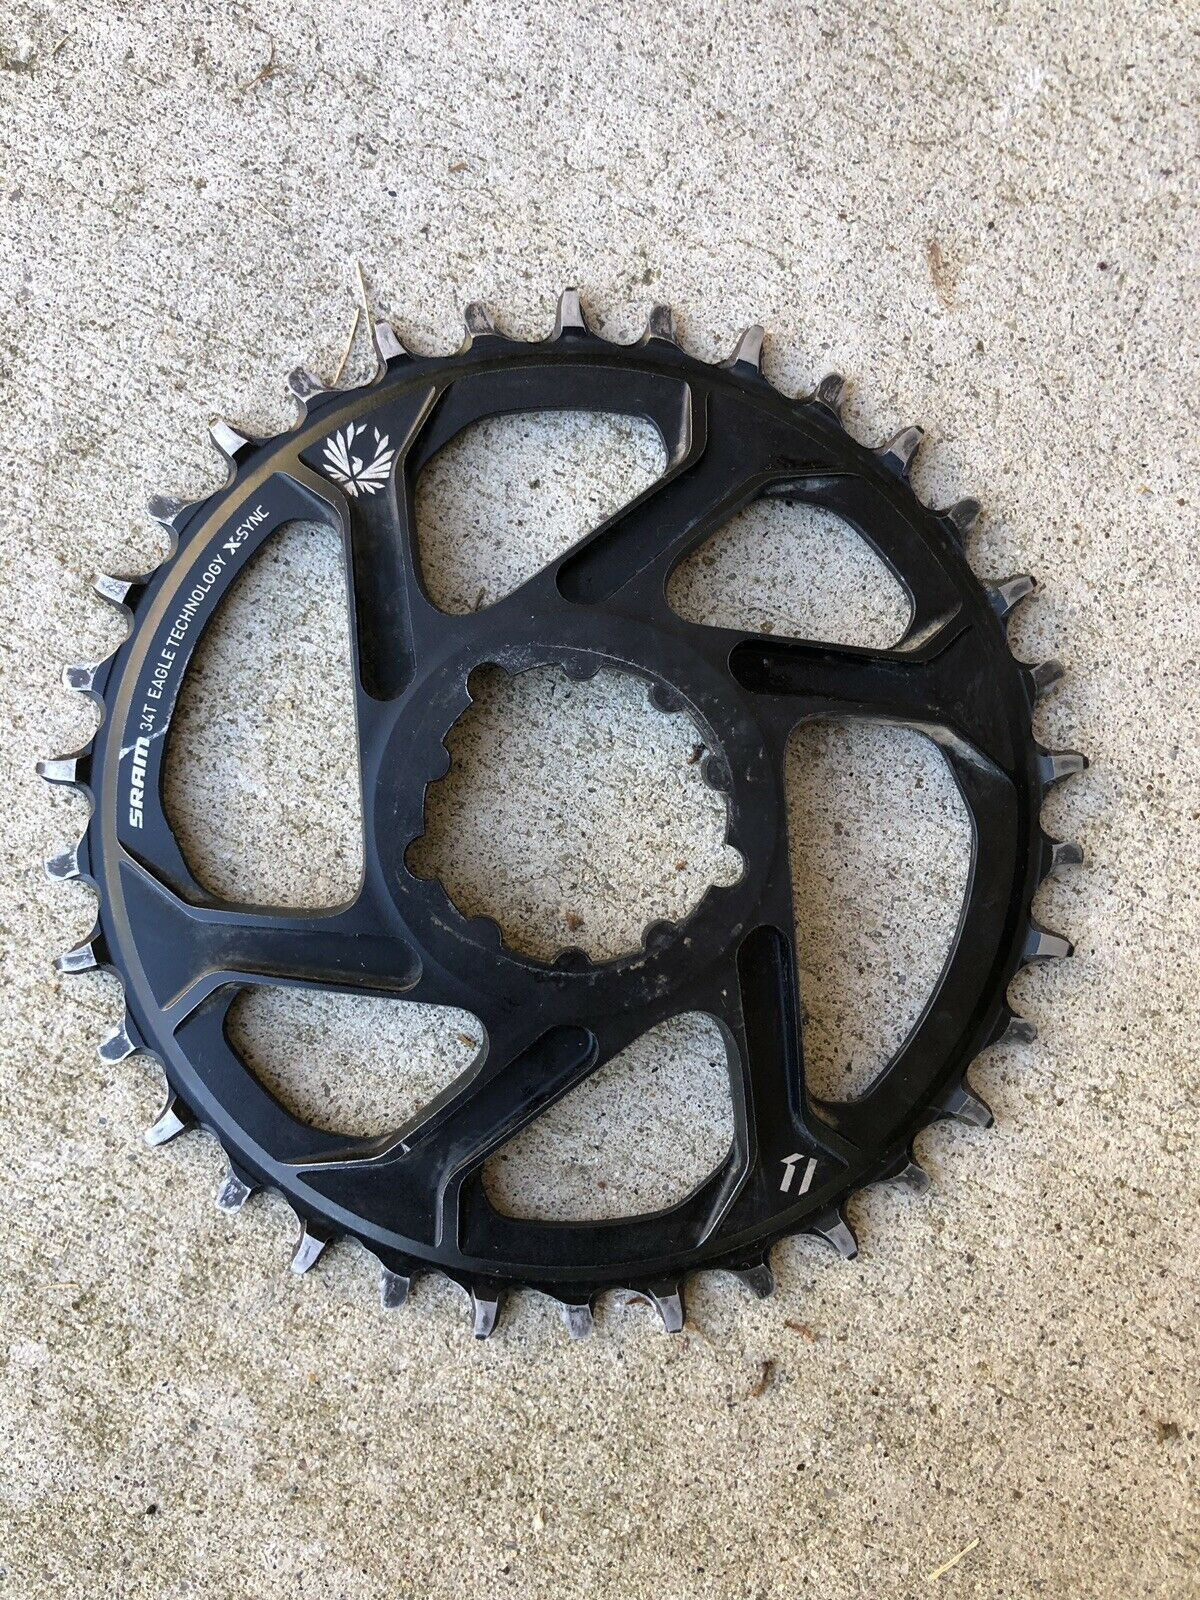 Does this chainring look worn? - Bike Forums